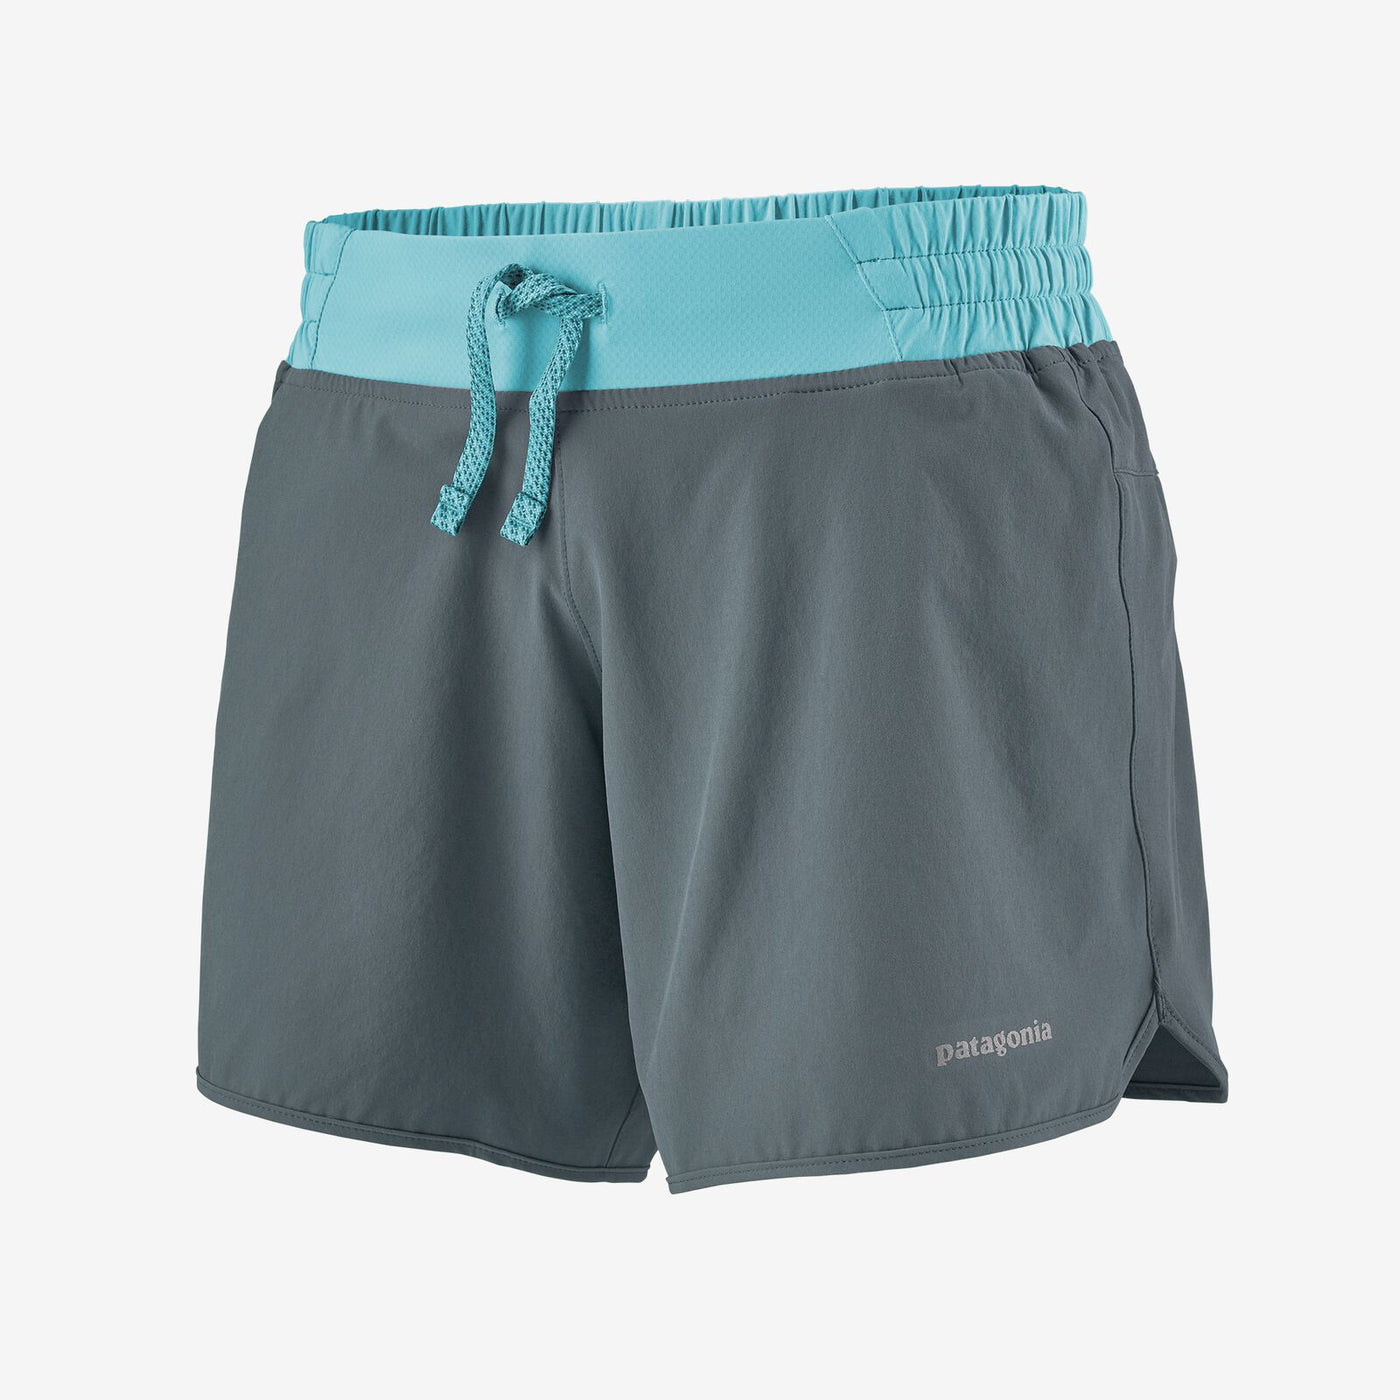 Patagonia Women's Nine Trails Shorts 6 in. SALE Now 40% Off!